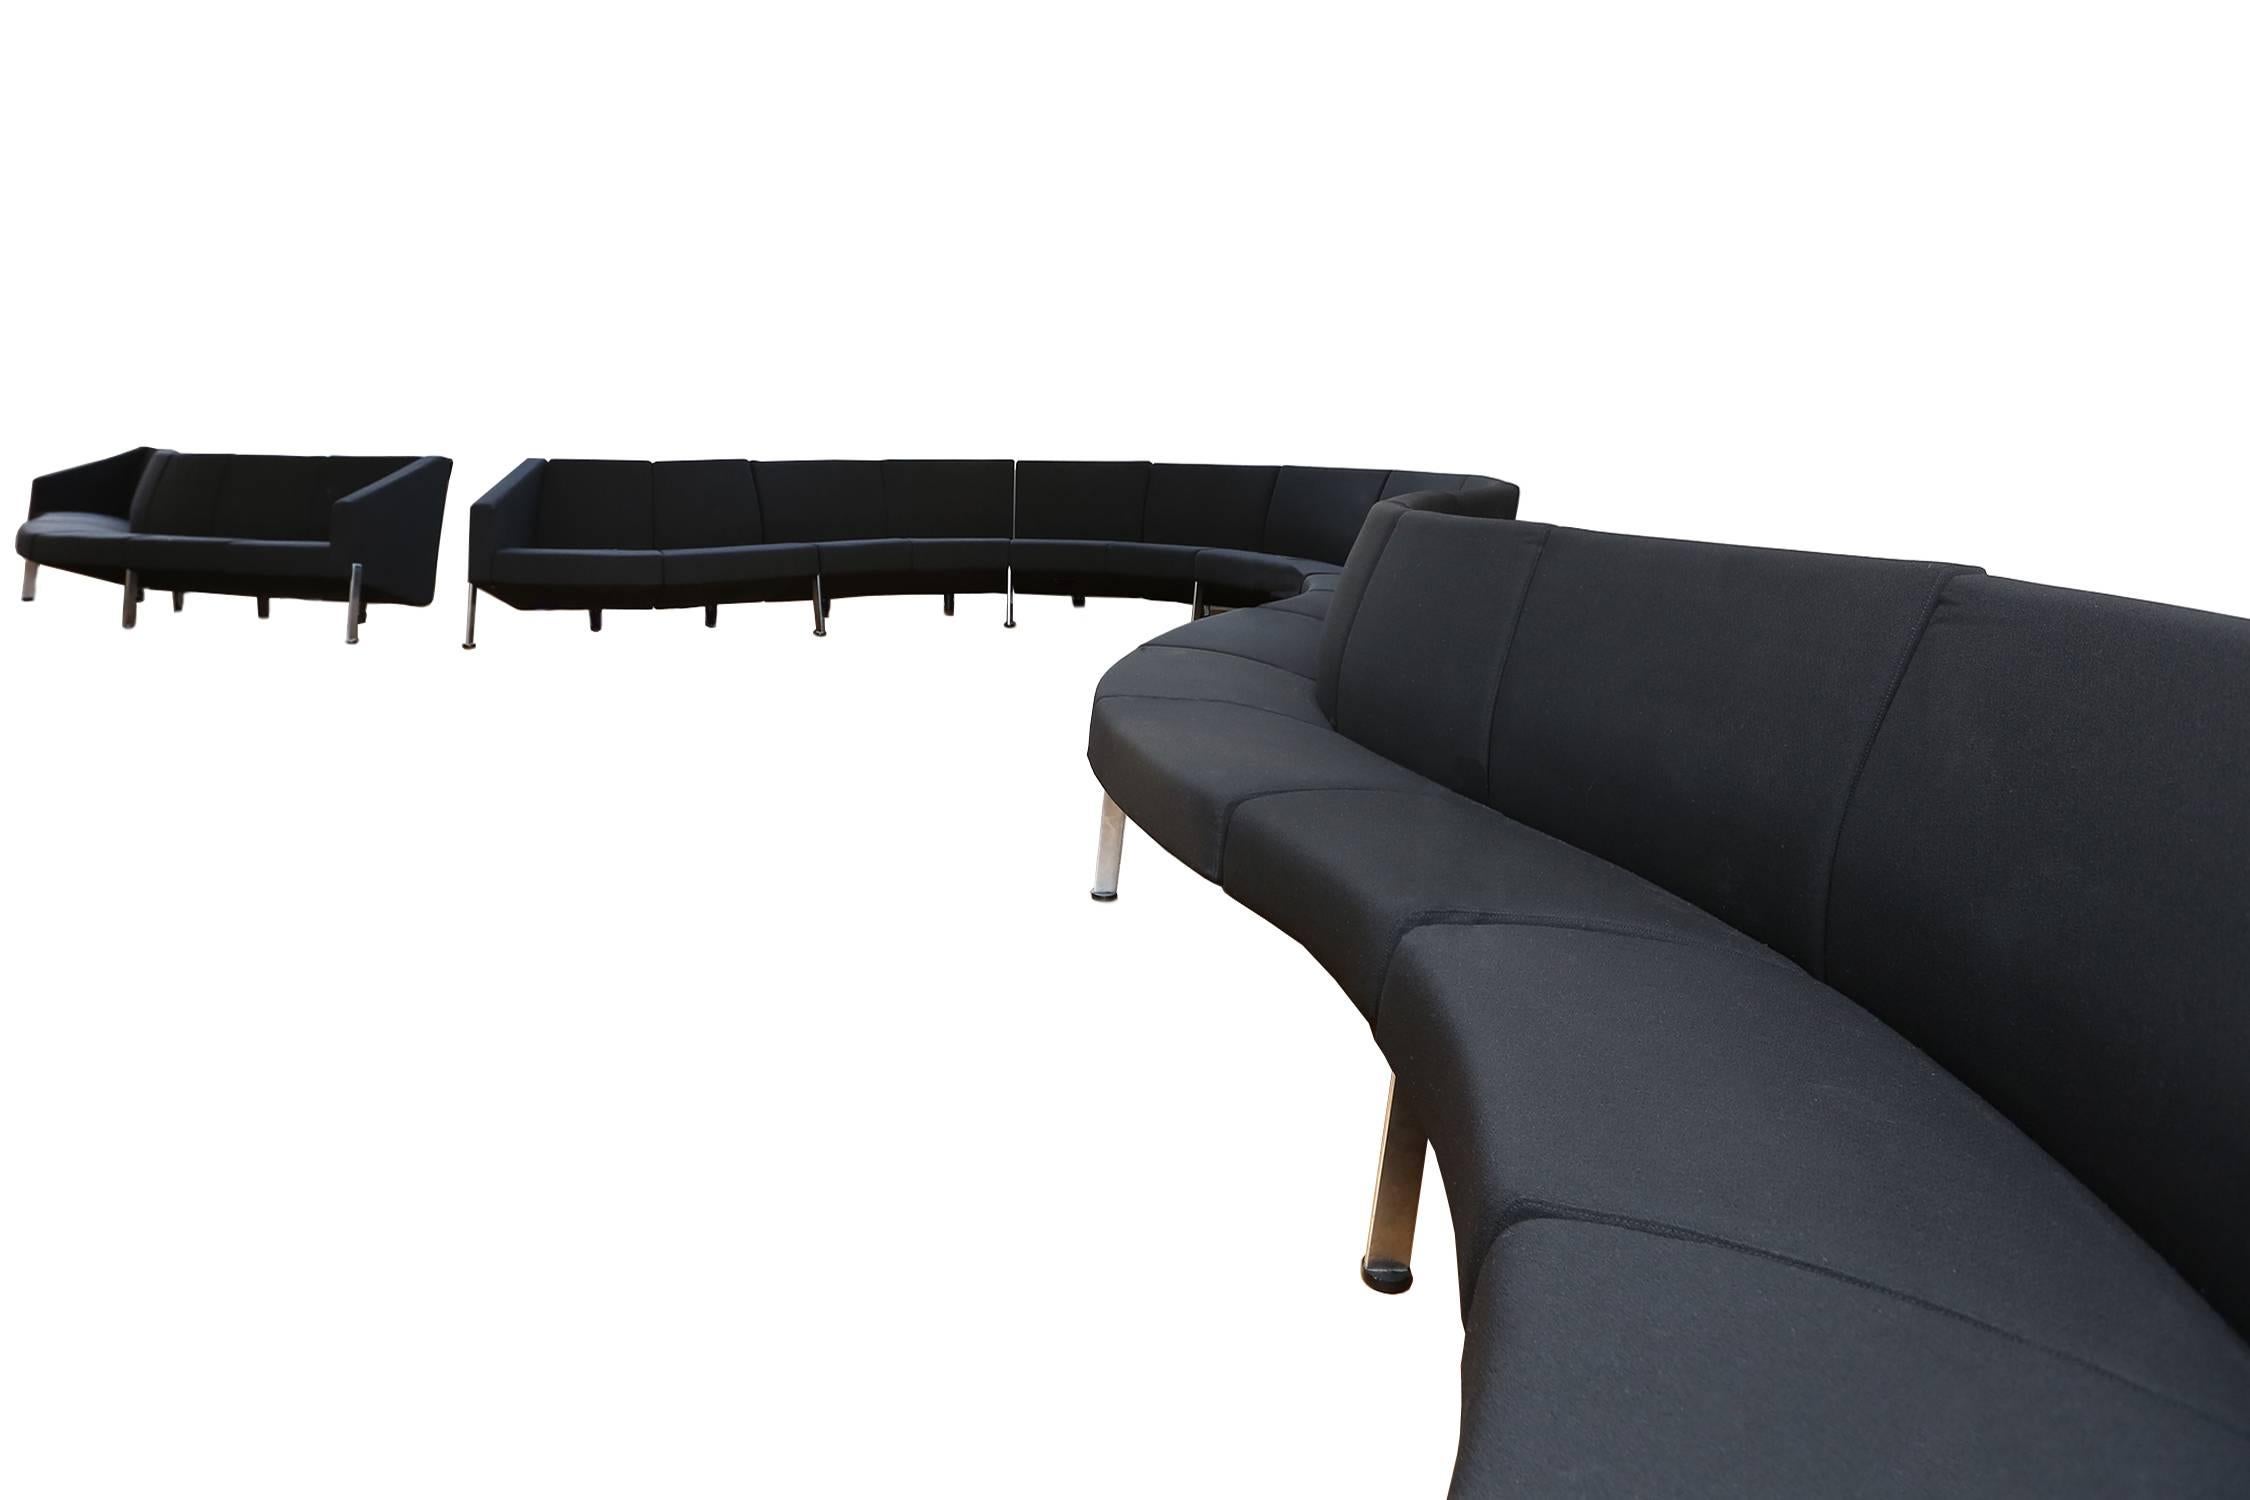 Post-modern sofa 
30 modular elements in black fabric, matte chromed steel.
Fritz Hansen, decision, 1986.

Six ends are available so we are able to divide in three sofas.
16 inwards elements, 12 outwards elements, four straight elements 

Dimension